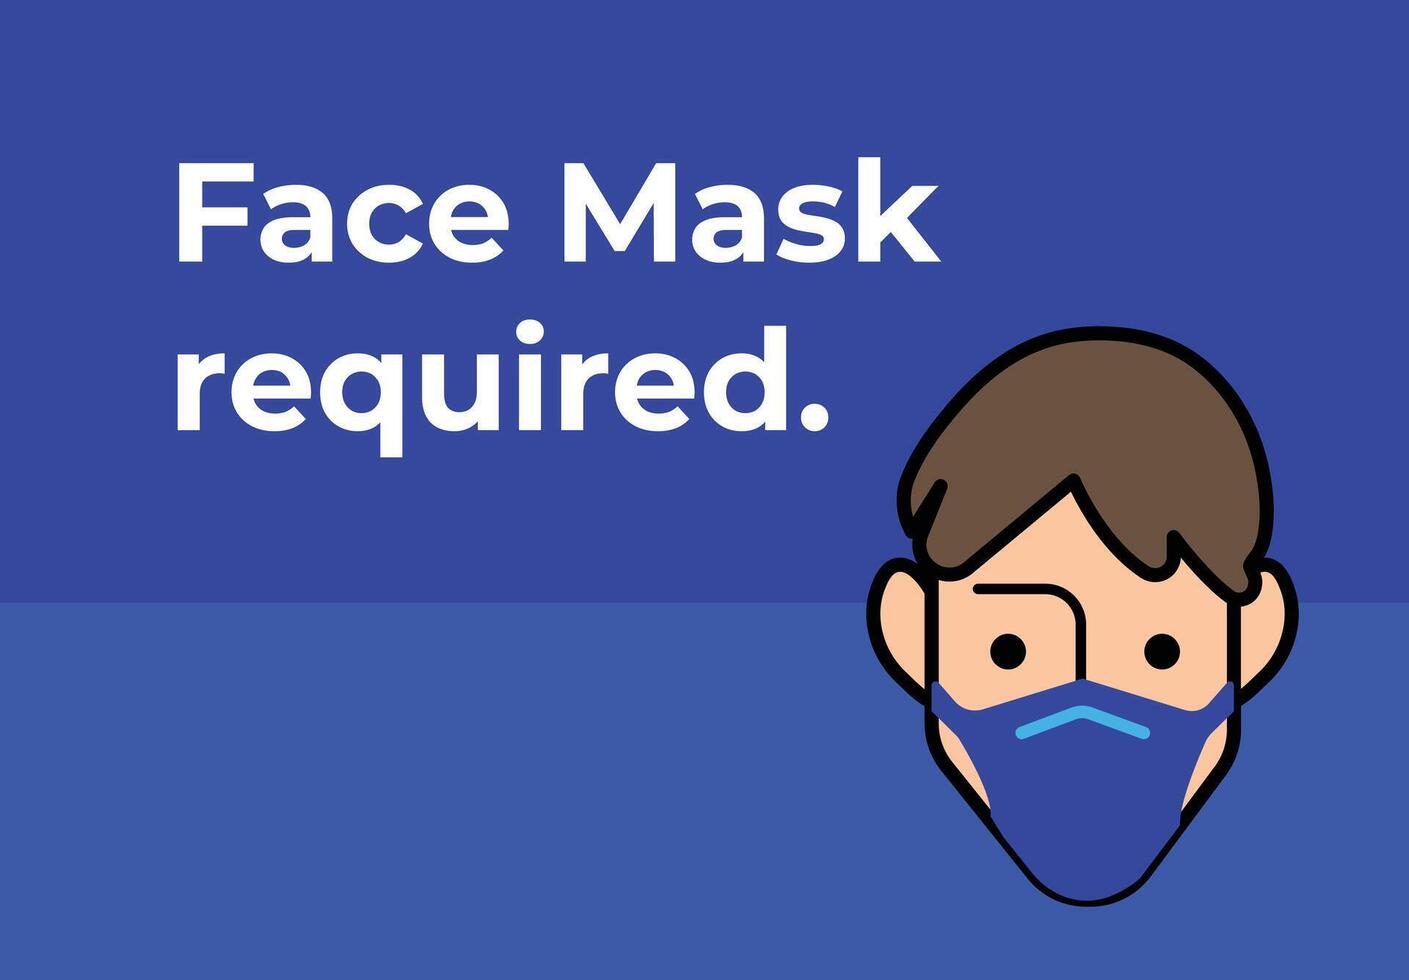 Face mask particle protection required sign age poster design illustration isolated on horizontal blue background. Simple flat safety graphic design poster cartoon drawing. vector